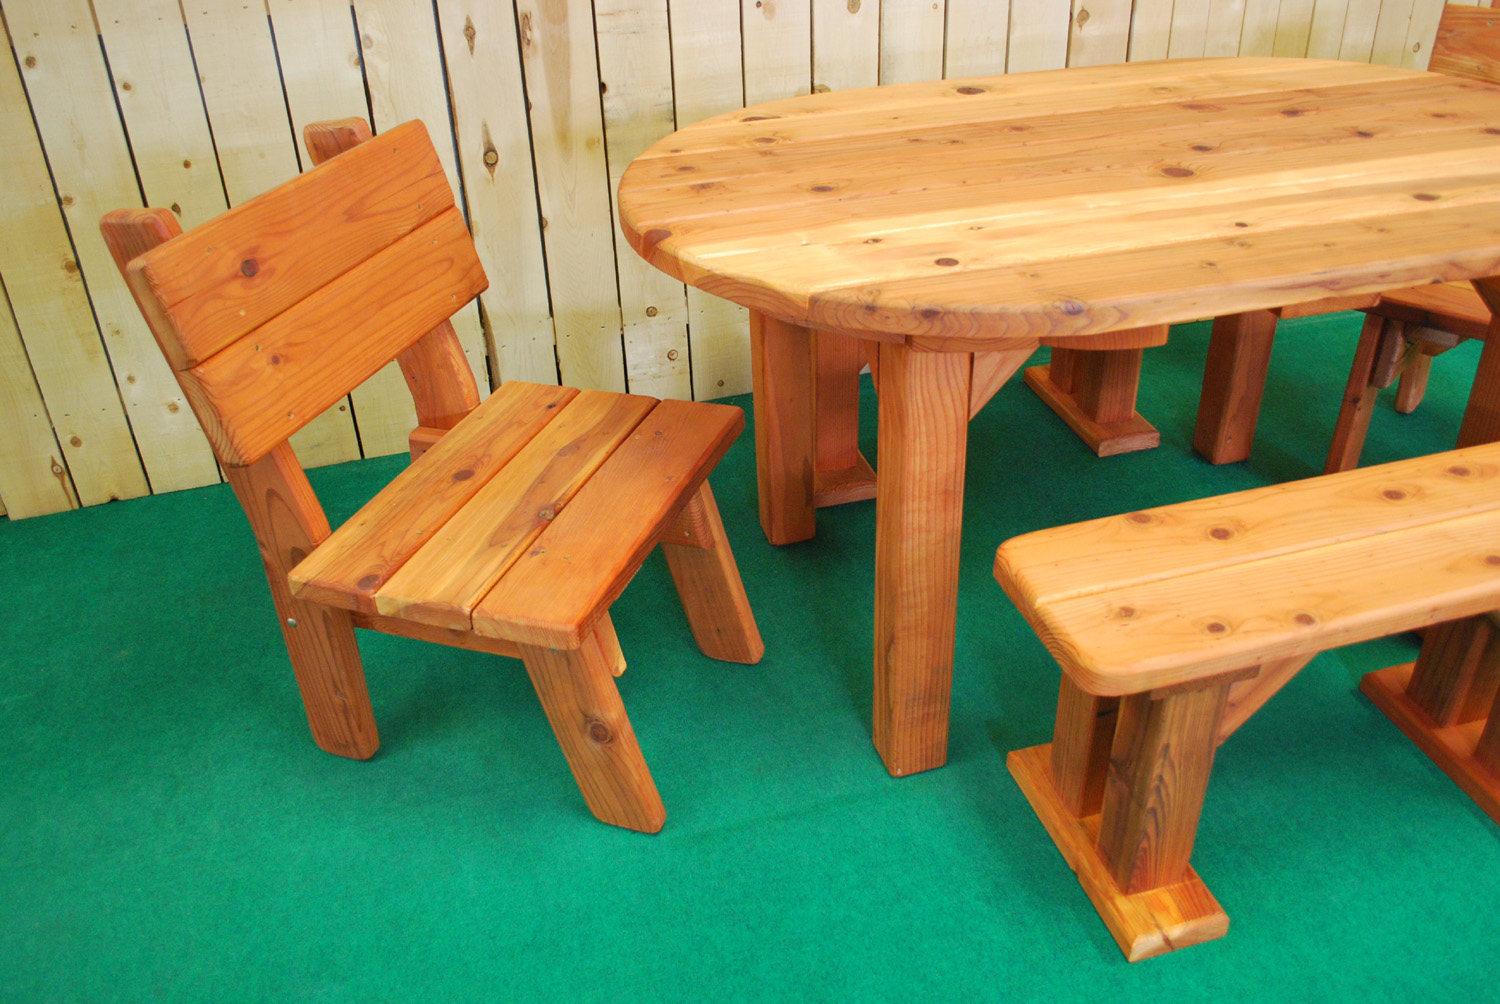 60" redwood oval picnic table